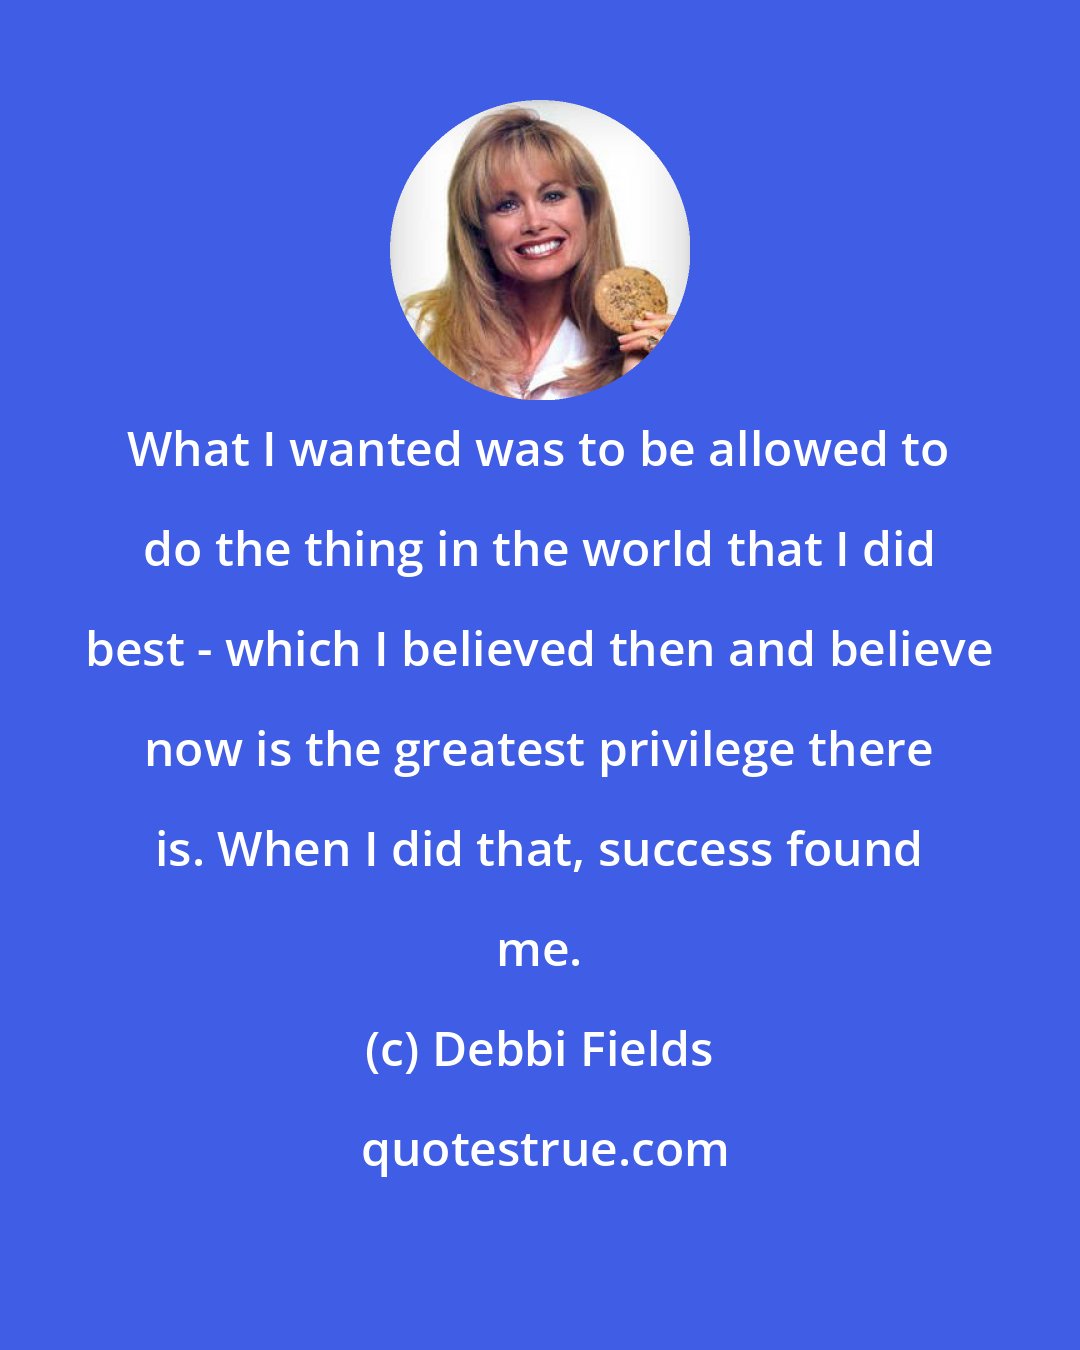 Debbi Fields: What I wanted was to be allowed to do the thing in the world that I did best - which I believed then and believe now is the greatest privilege there is. When I did that, success found me.